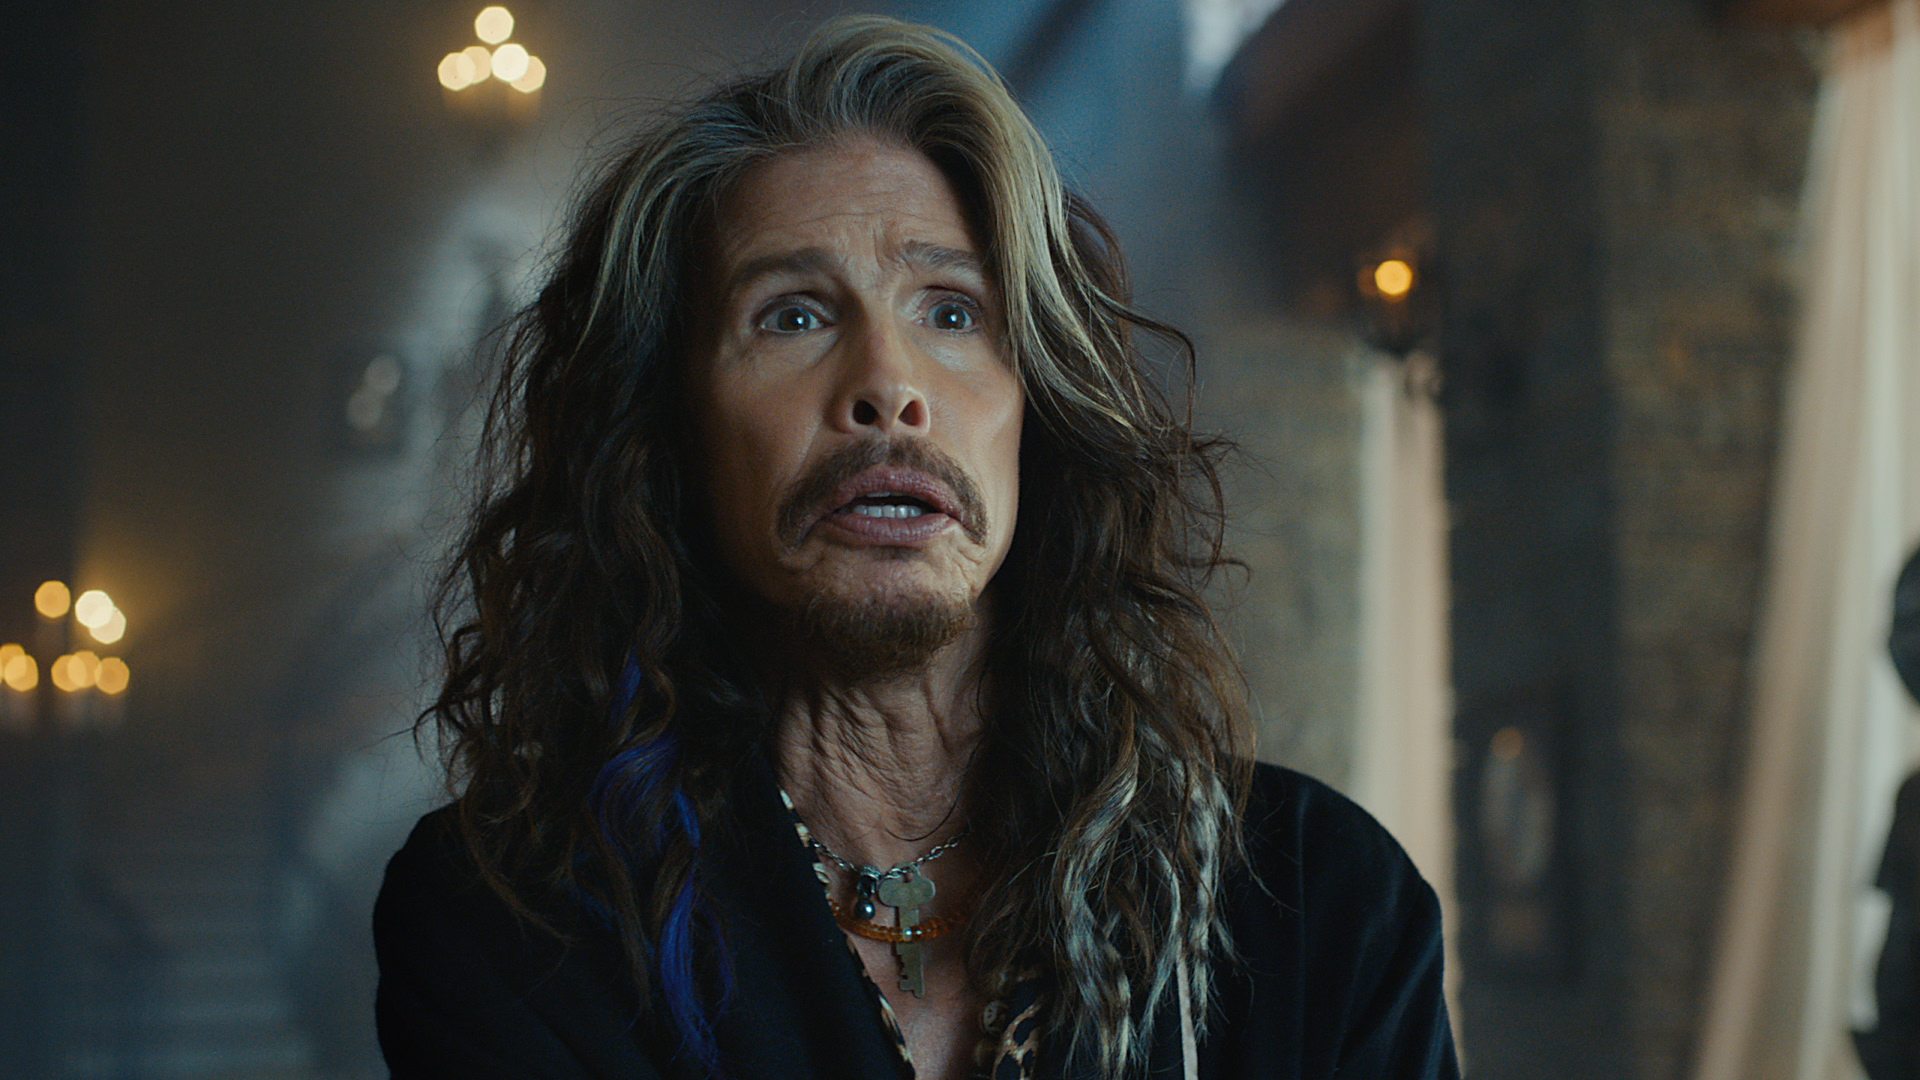 Aerosmith frontman Steven Tyler promotes Skittles in the company&#039;s Super Bowl 50 spot. This is the first time Skittles has ever featured a celebrity in a TV commercial, and the brand&#039;s second Super Bowl ad after debuting during the 2015 Super Bowl. (Wm. Wrigley Jr.